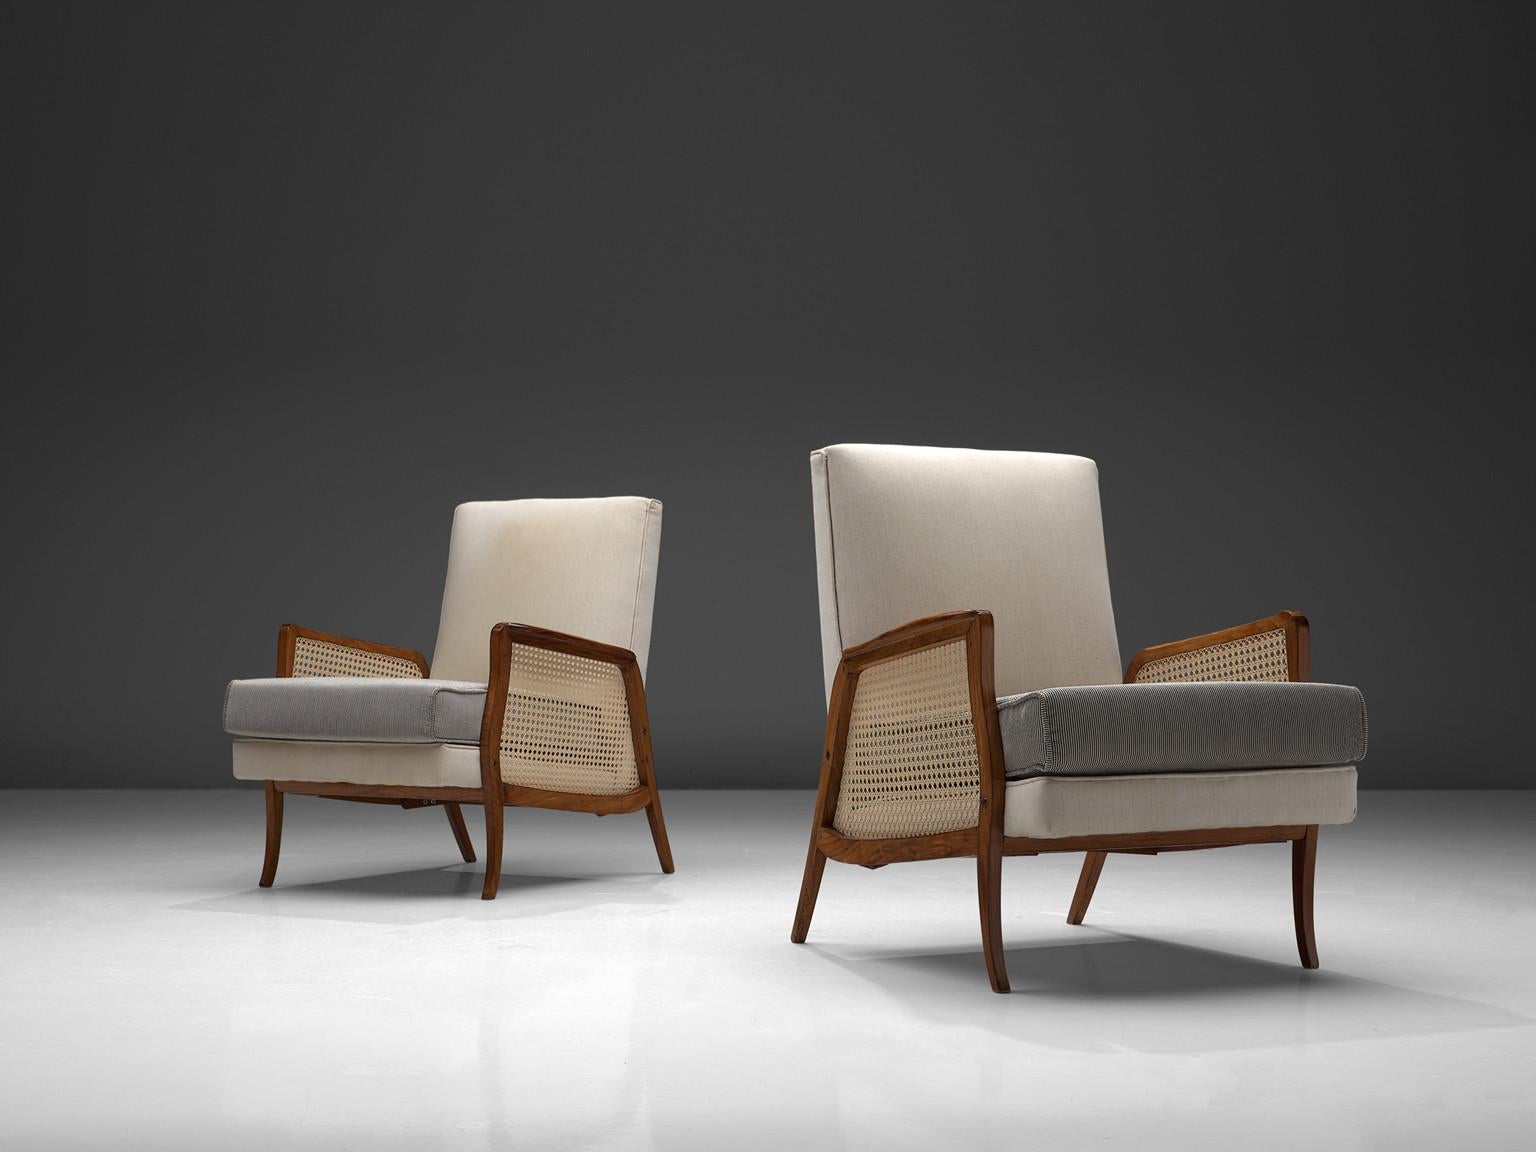 Set of two armchairs, caviuna, cane and grey fabric, Brazil, 1960s

This Brazilian set of lounge chairs were made in the 1960s. The chairs have an elegant character, yet comfortable due to the soft cushions both in the backrest and seat. The